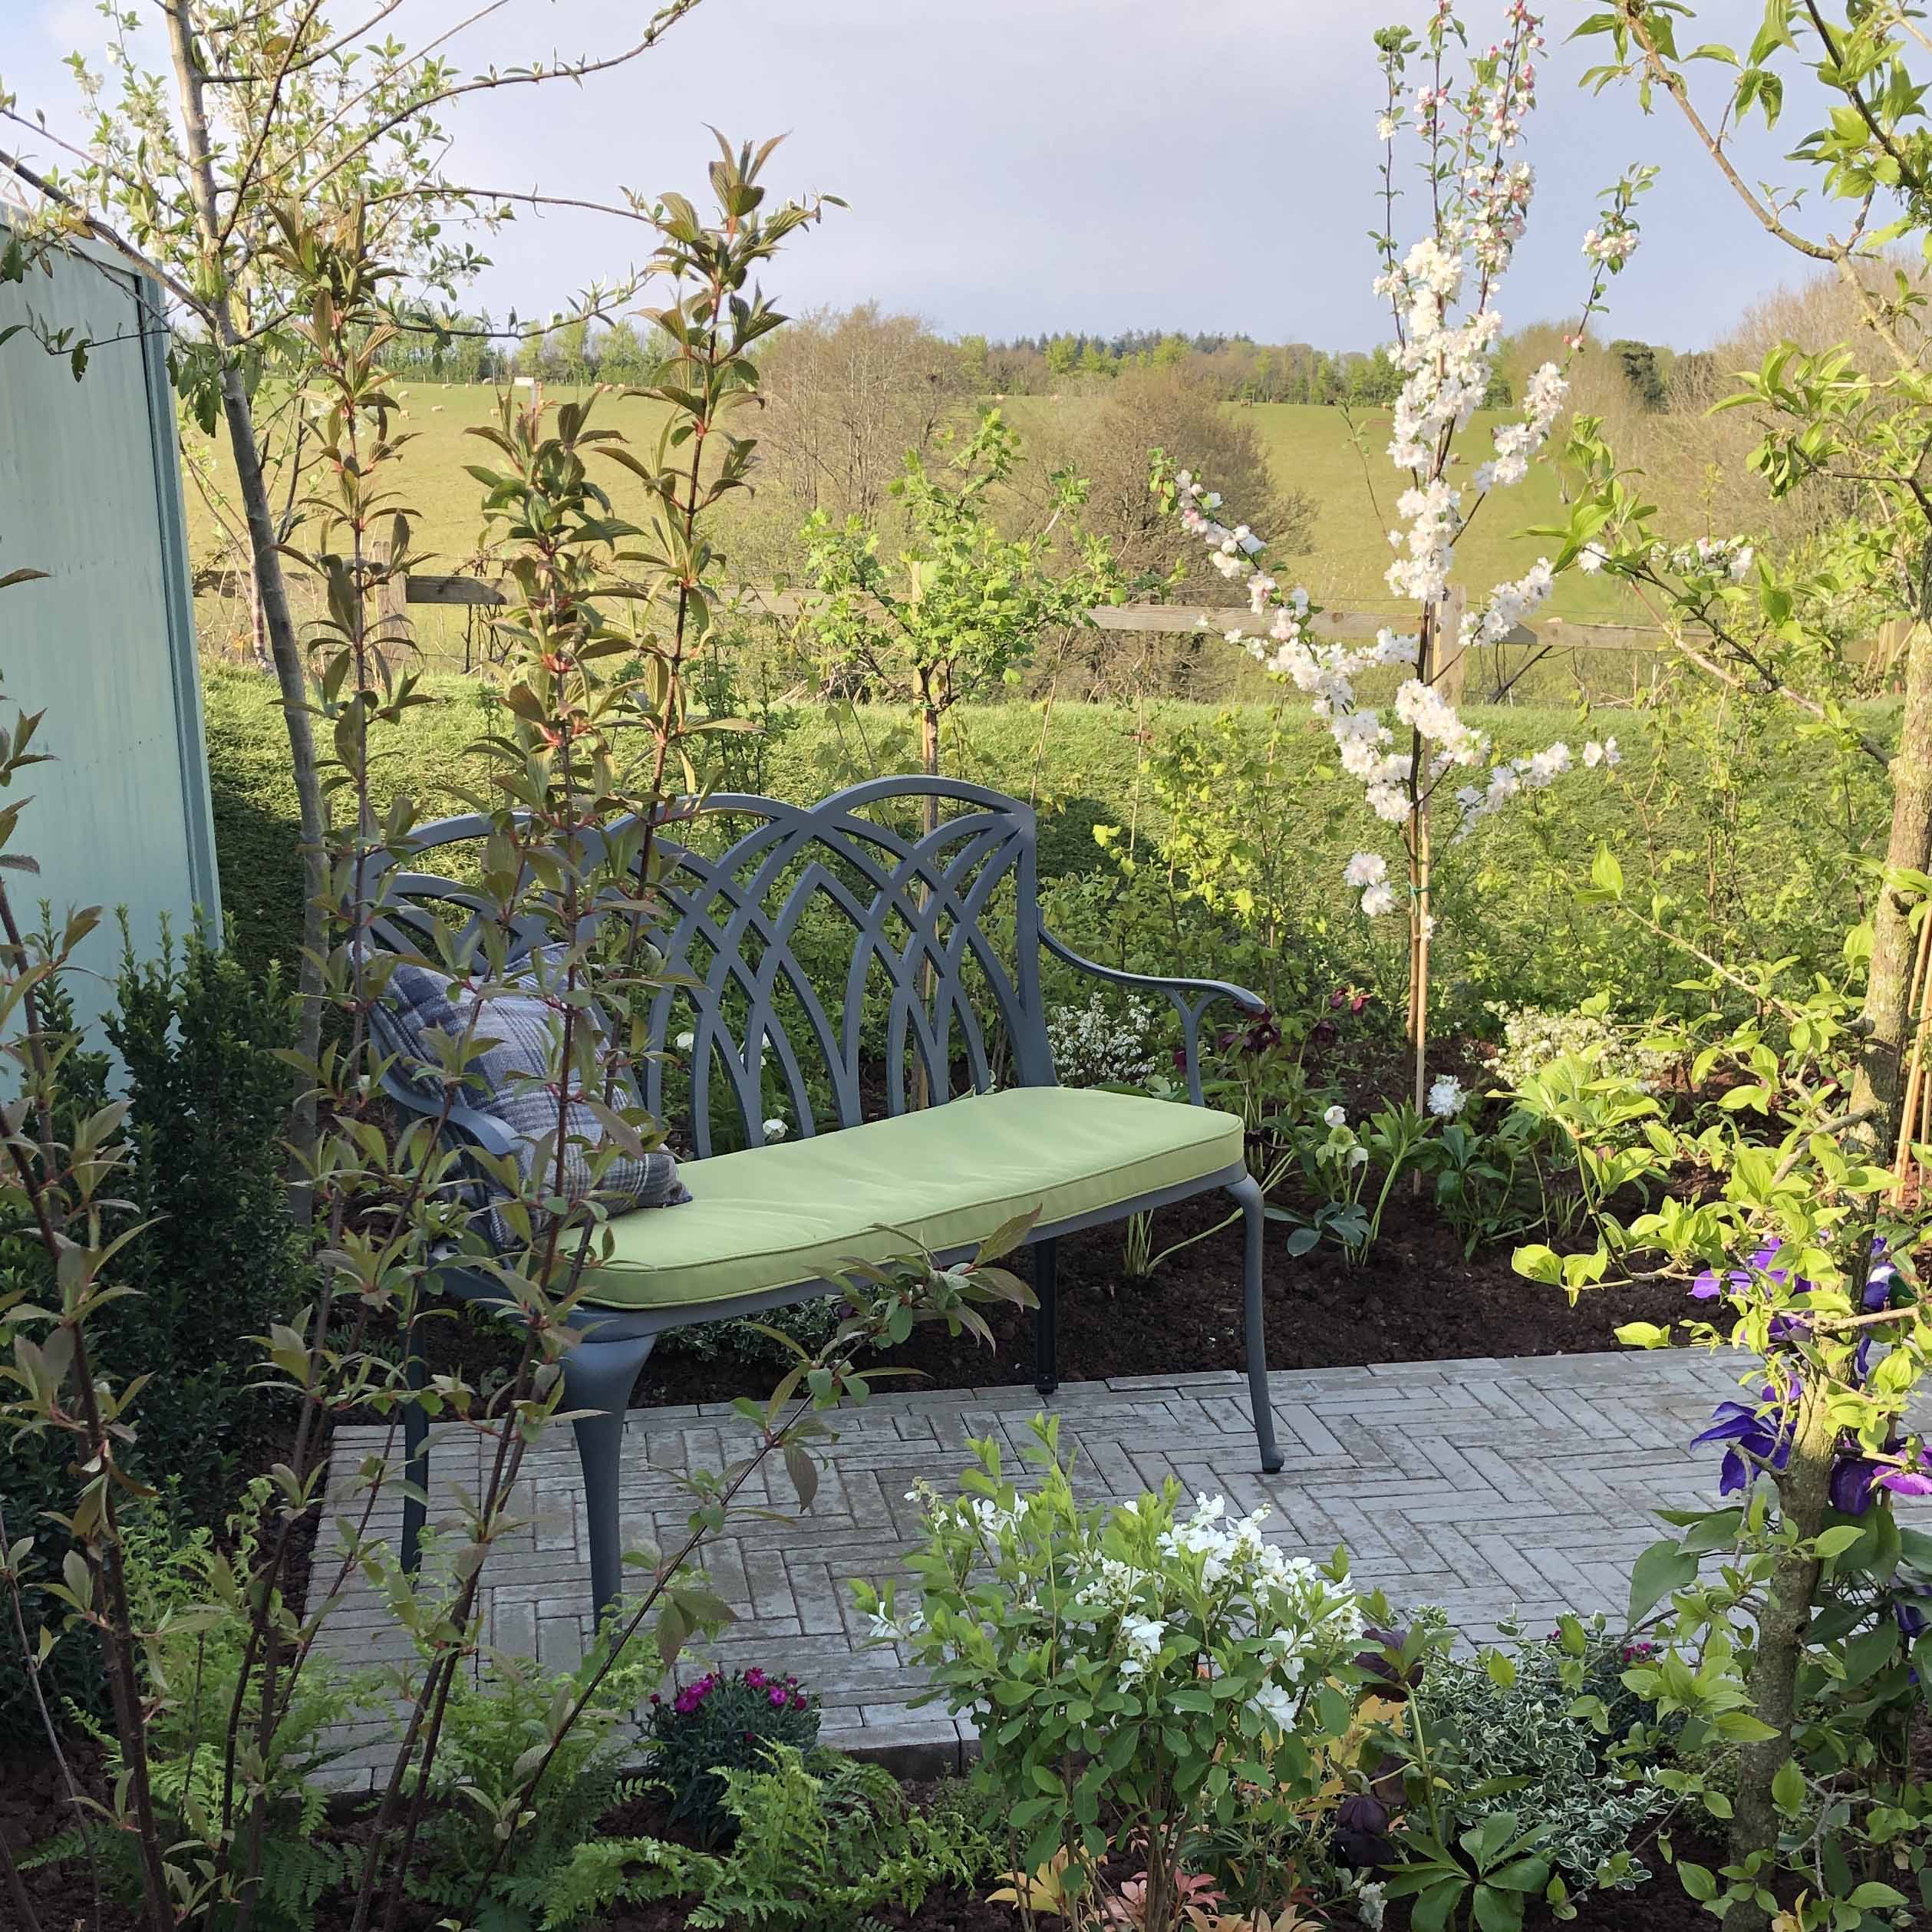 Two of our April garden benches were even recently featured on ITV’s Love Your Garden